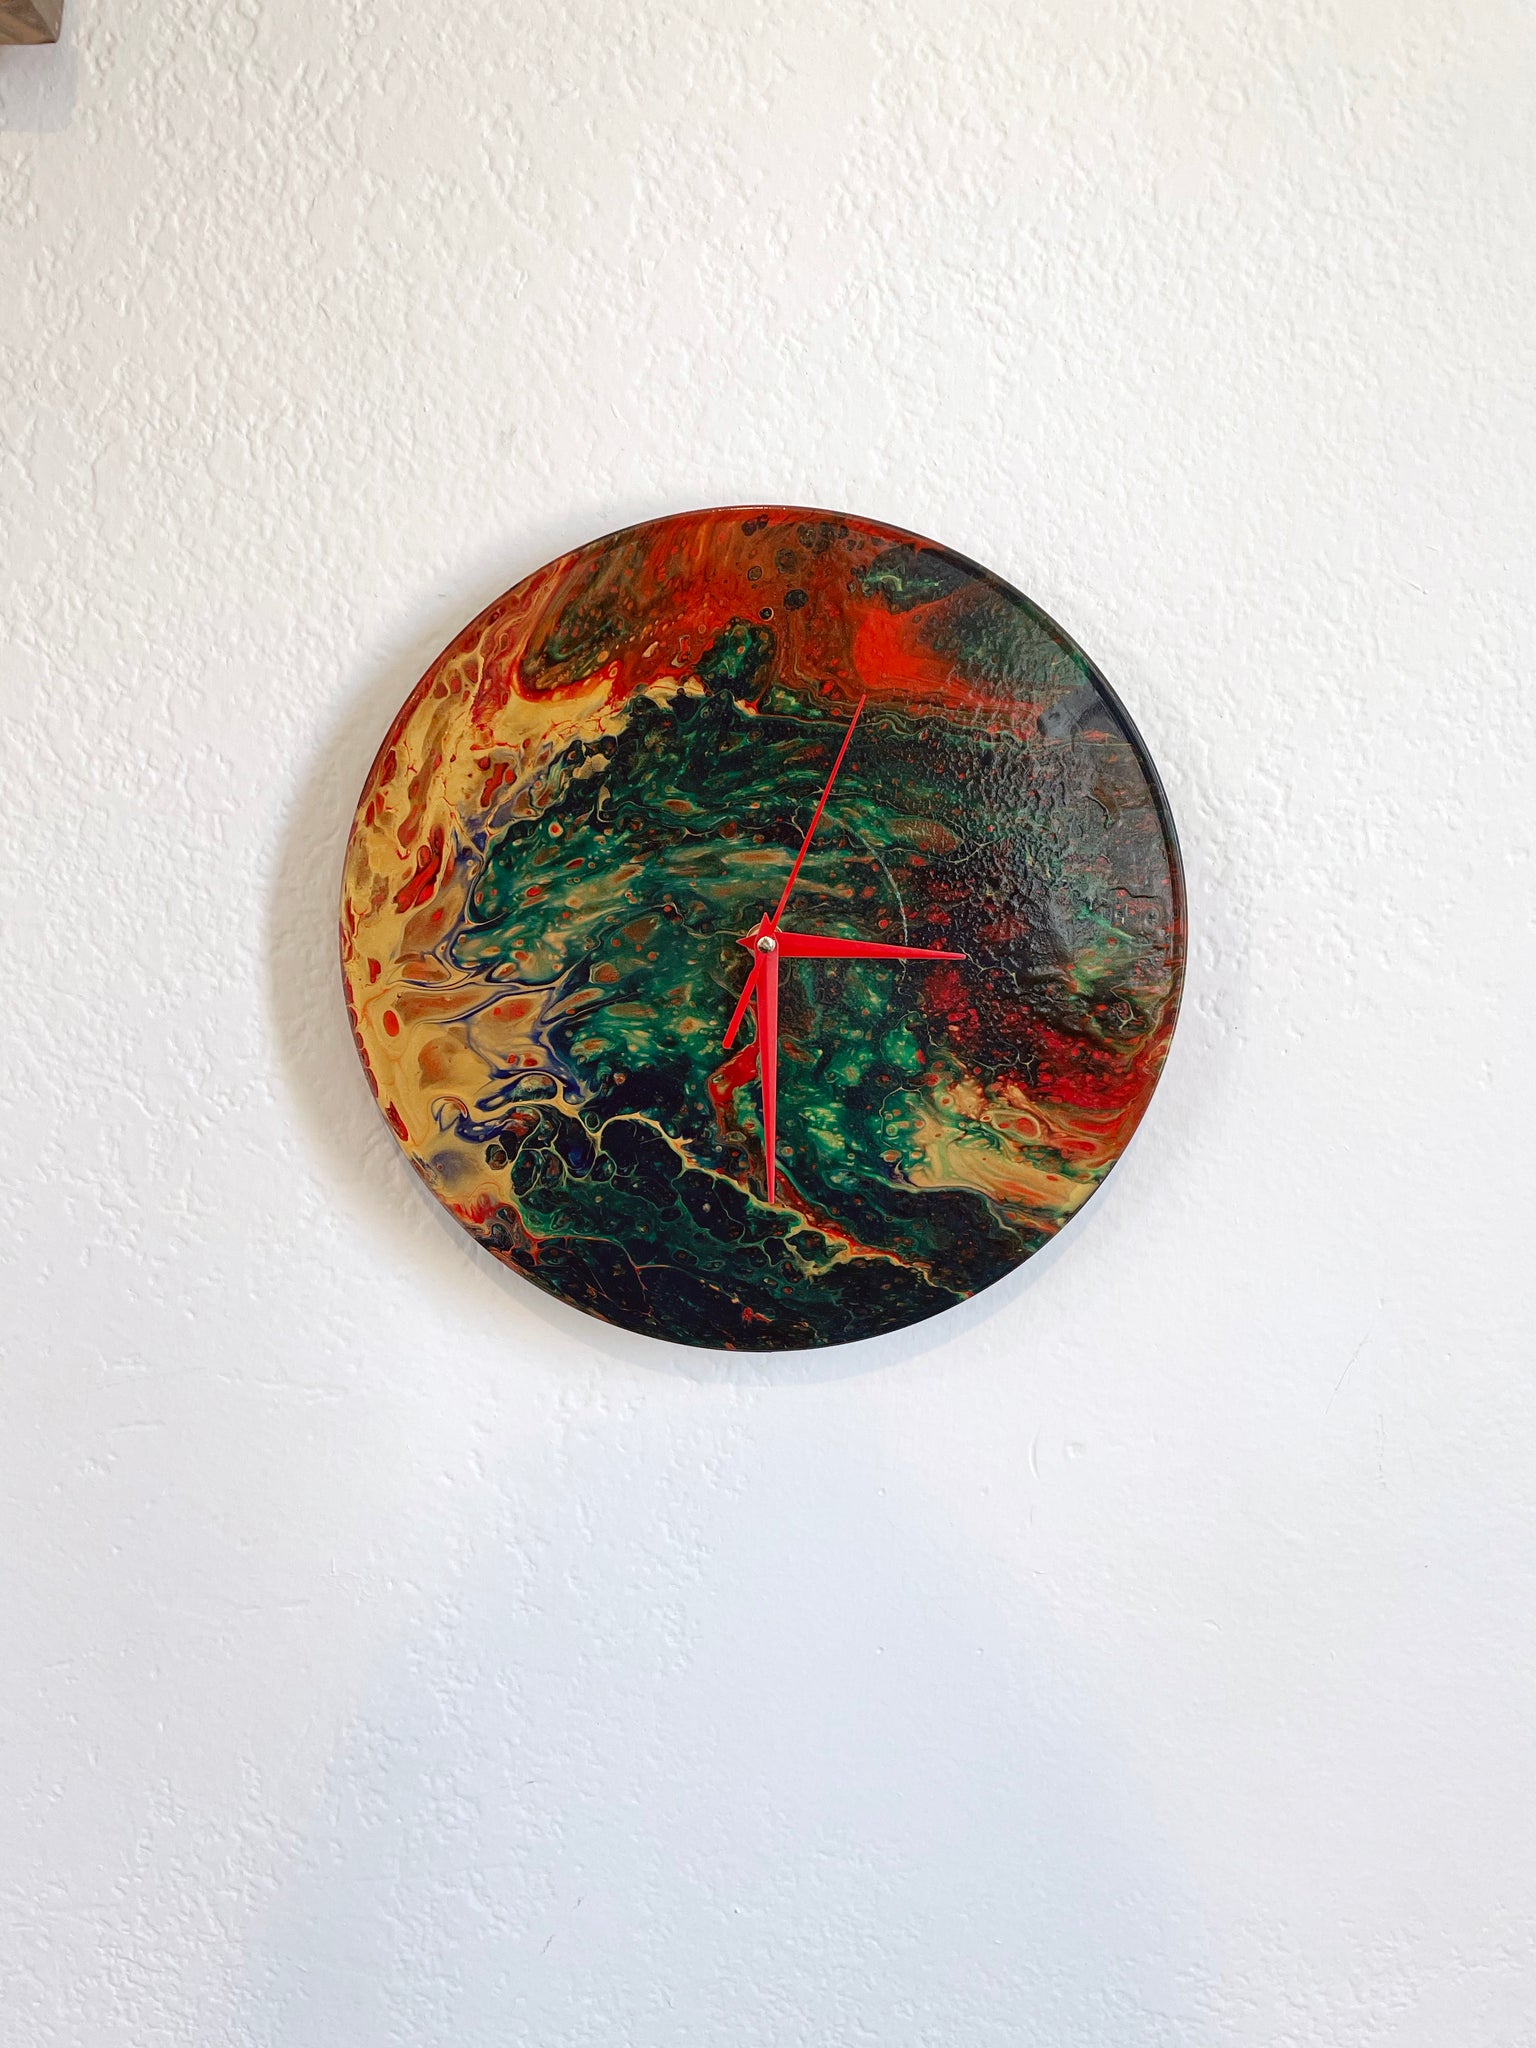 Snakeskin - Upcycled Vinyl Record Pour Painting Clock